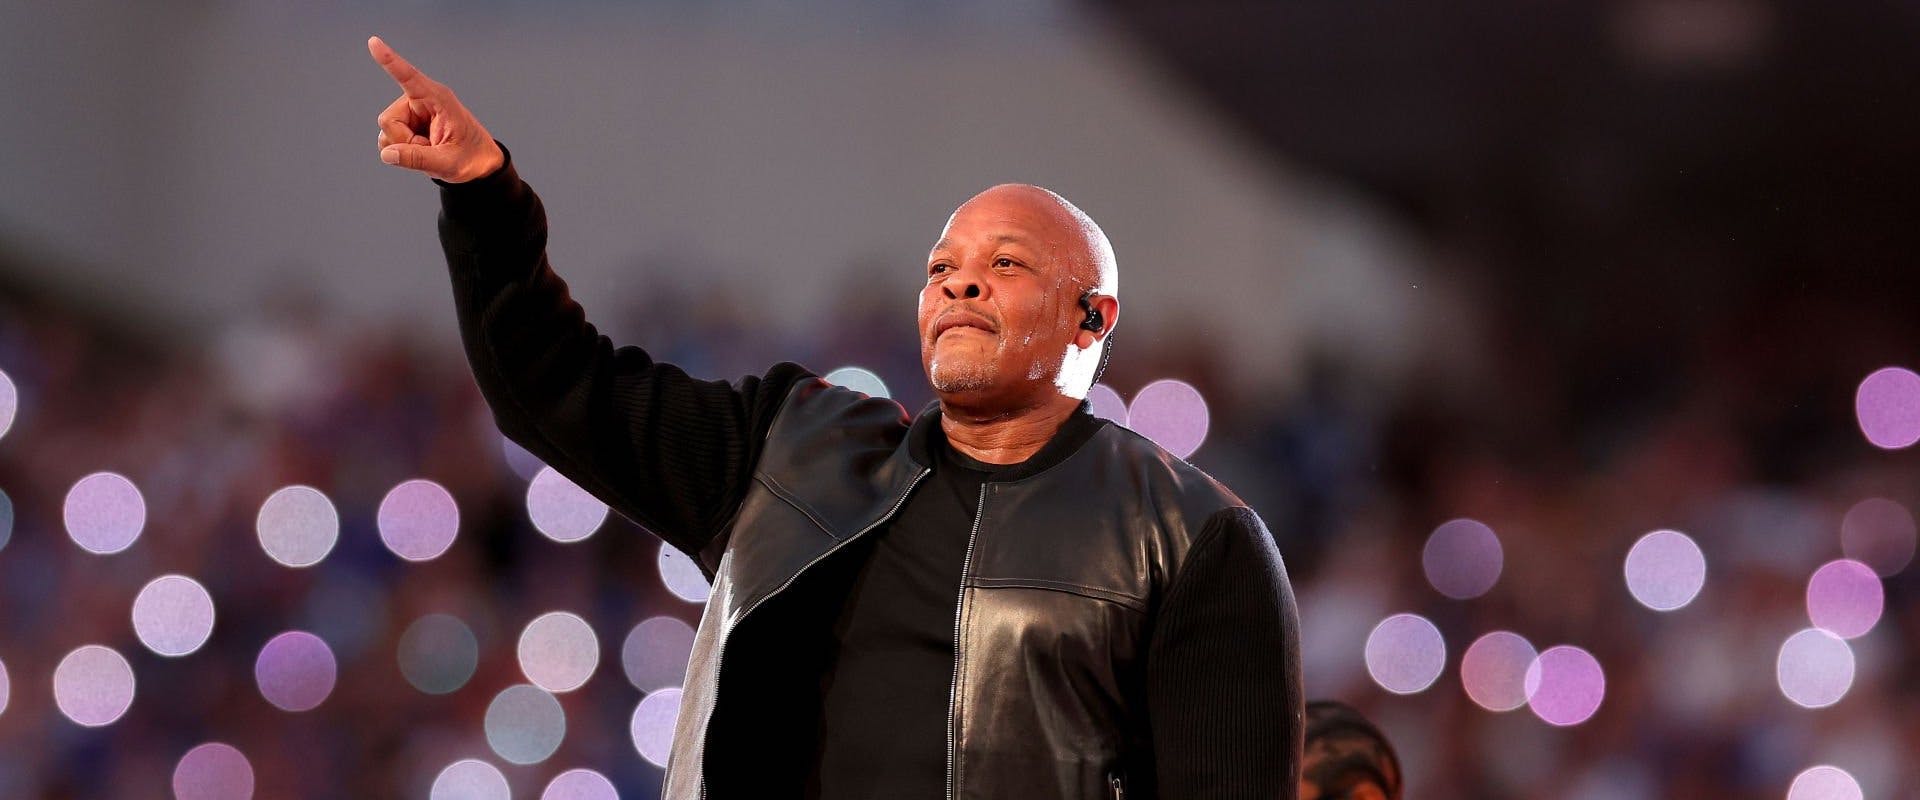 Dr. Dre performs during the Pepsi Super Bowl LVI Halftime Show at SoFi Stadium on February 13, 2022 in Inglewood, California. (Photo by Kevin C. Cox/Getty Images)